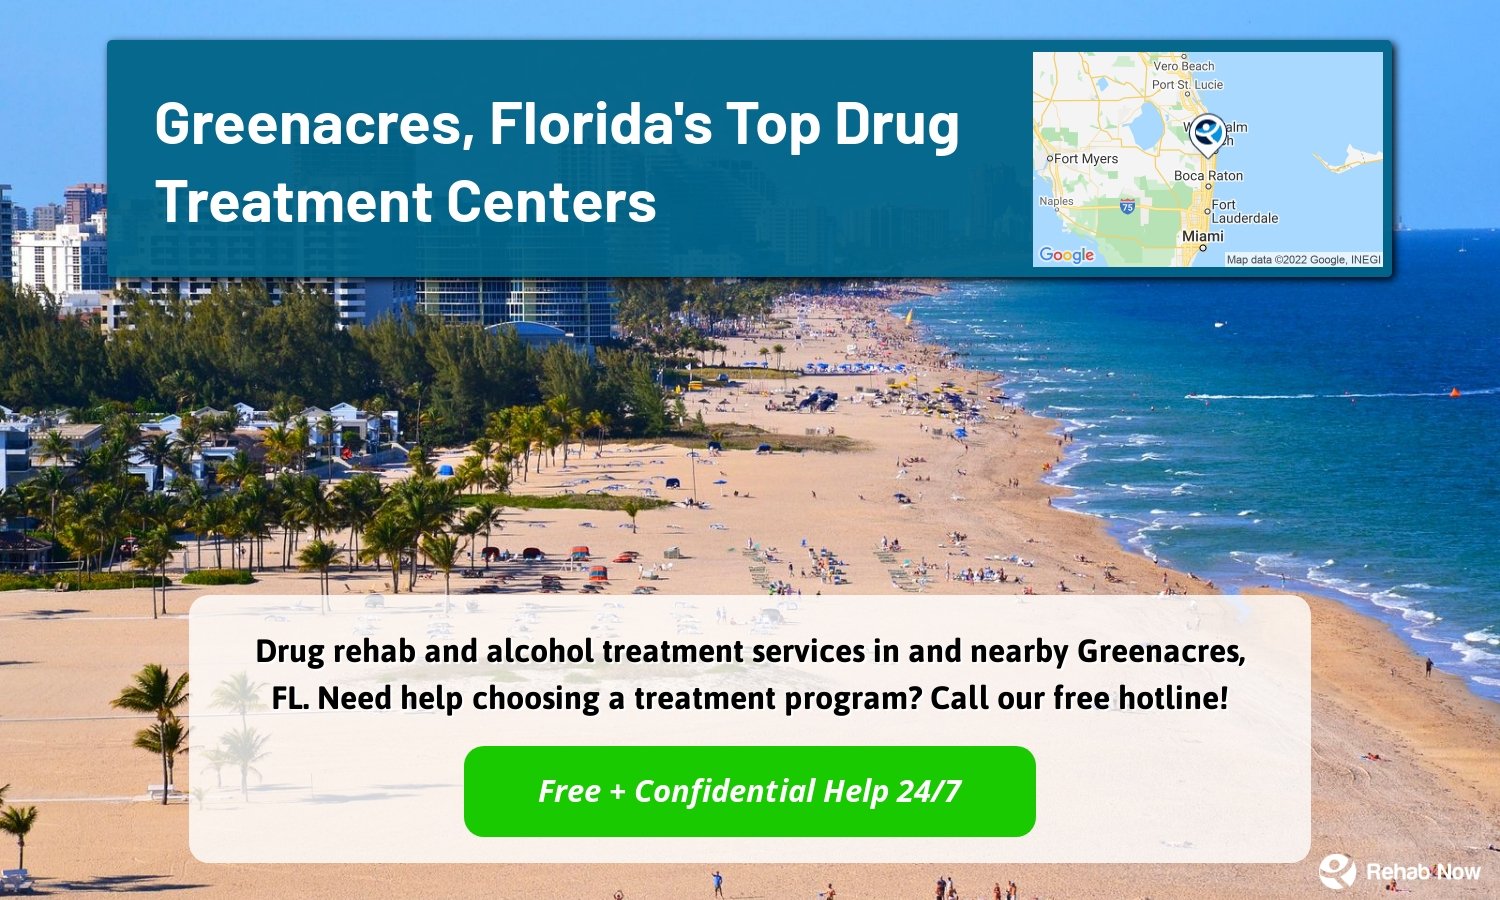 Drug rehab and alcohol treatment services in and nearby Greenacres, FL. Need help choosing a treatment program? Call our free hotline!